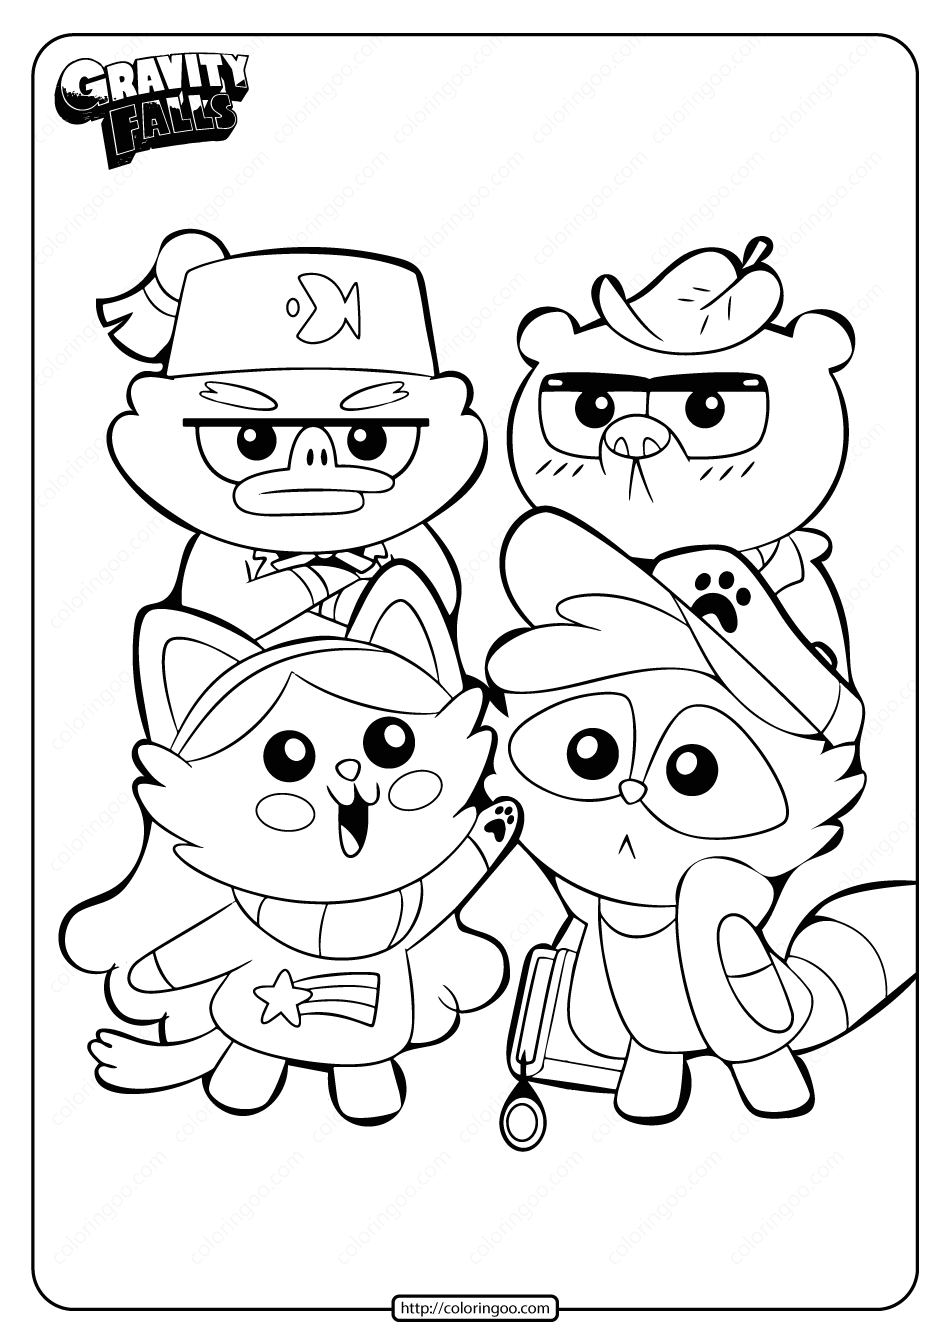 printable gravity falls cute animals coloring page